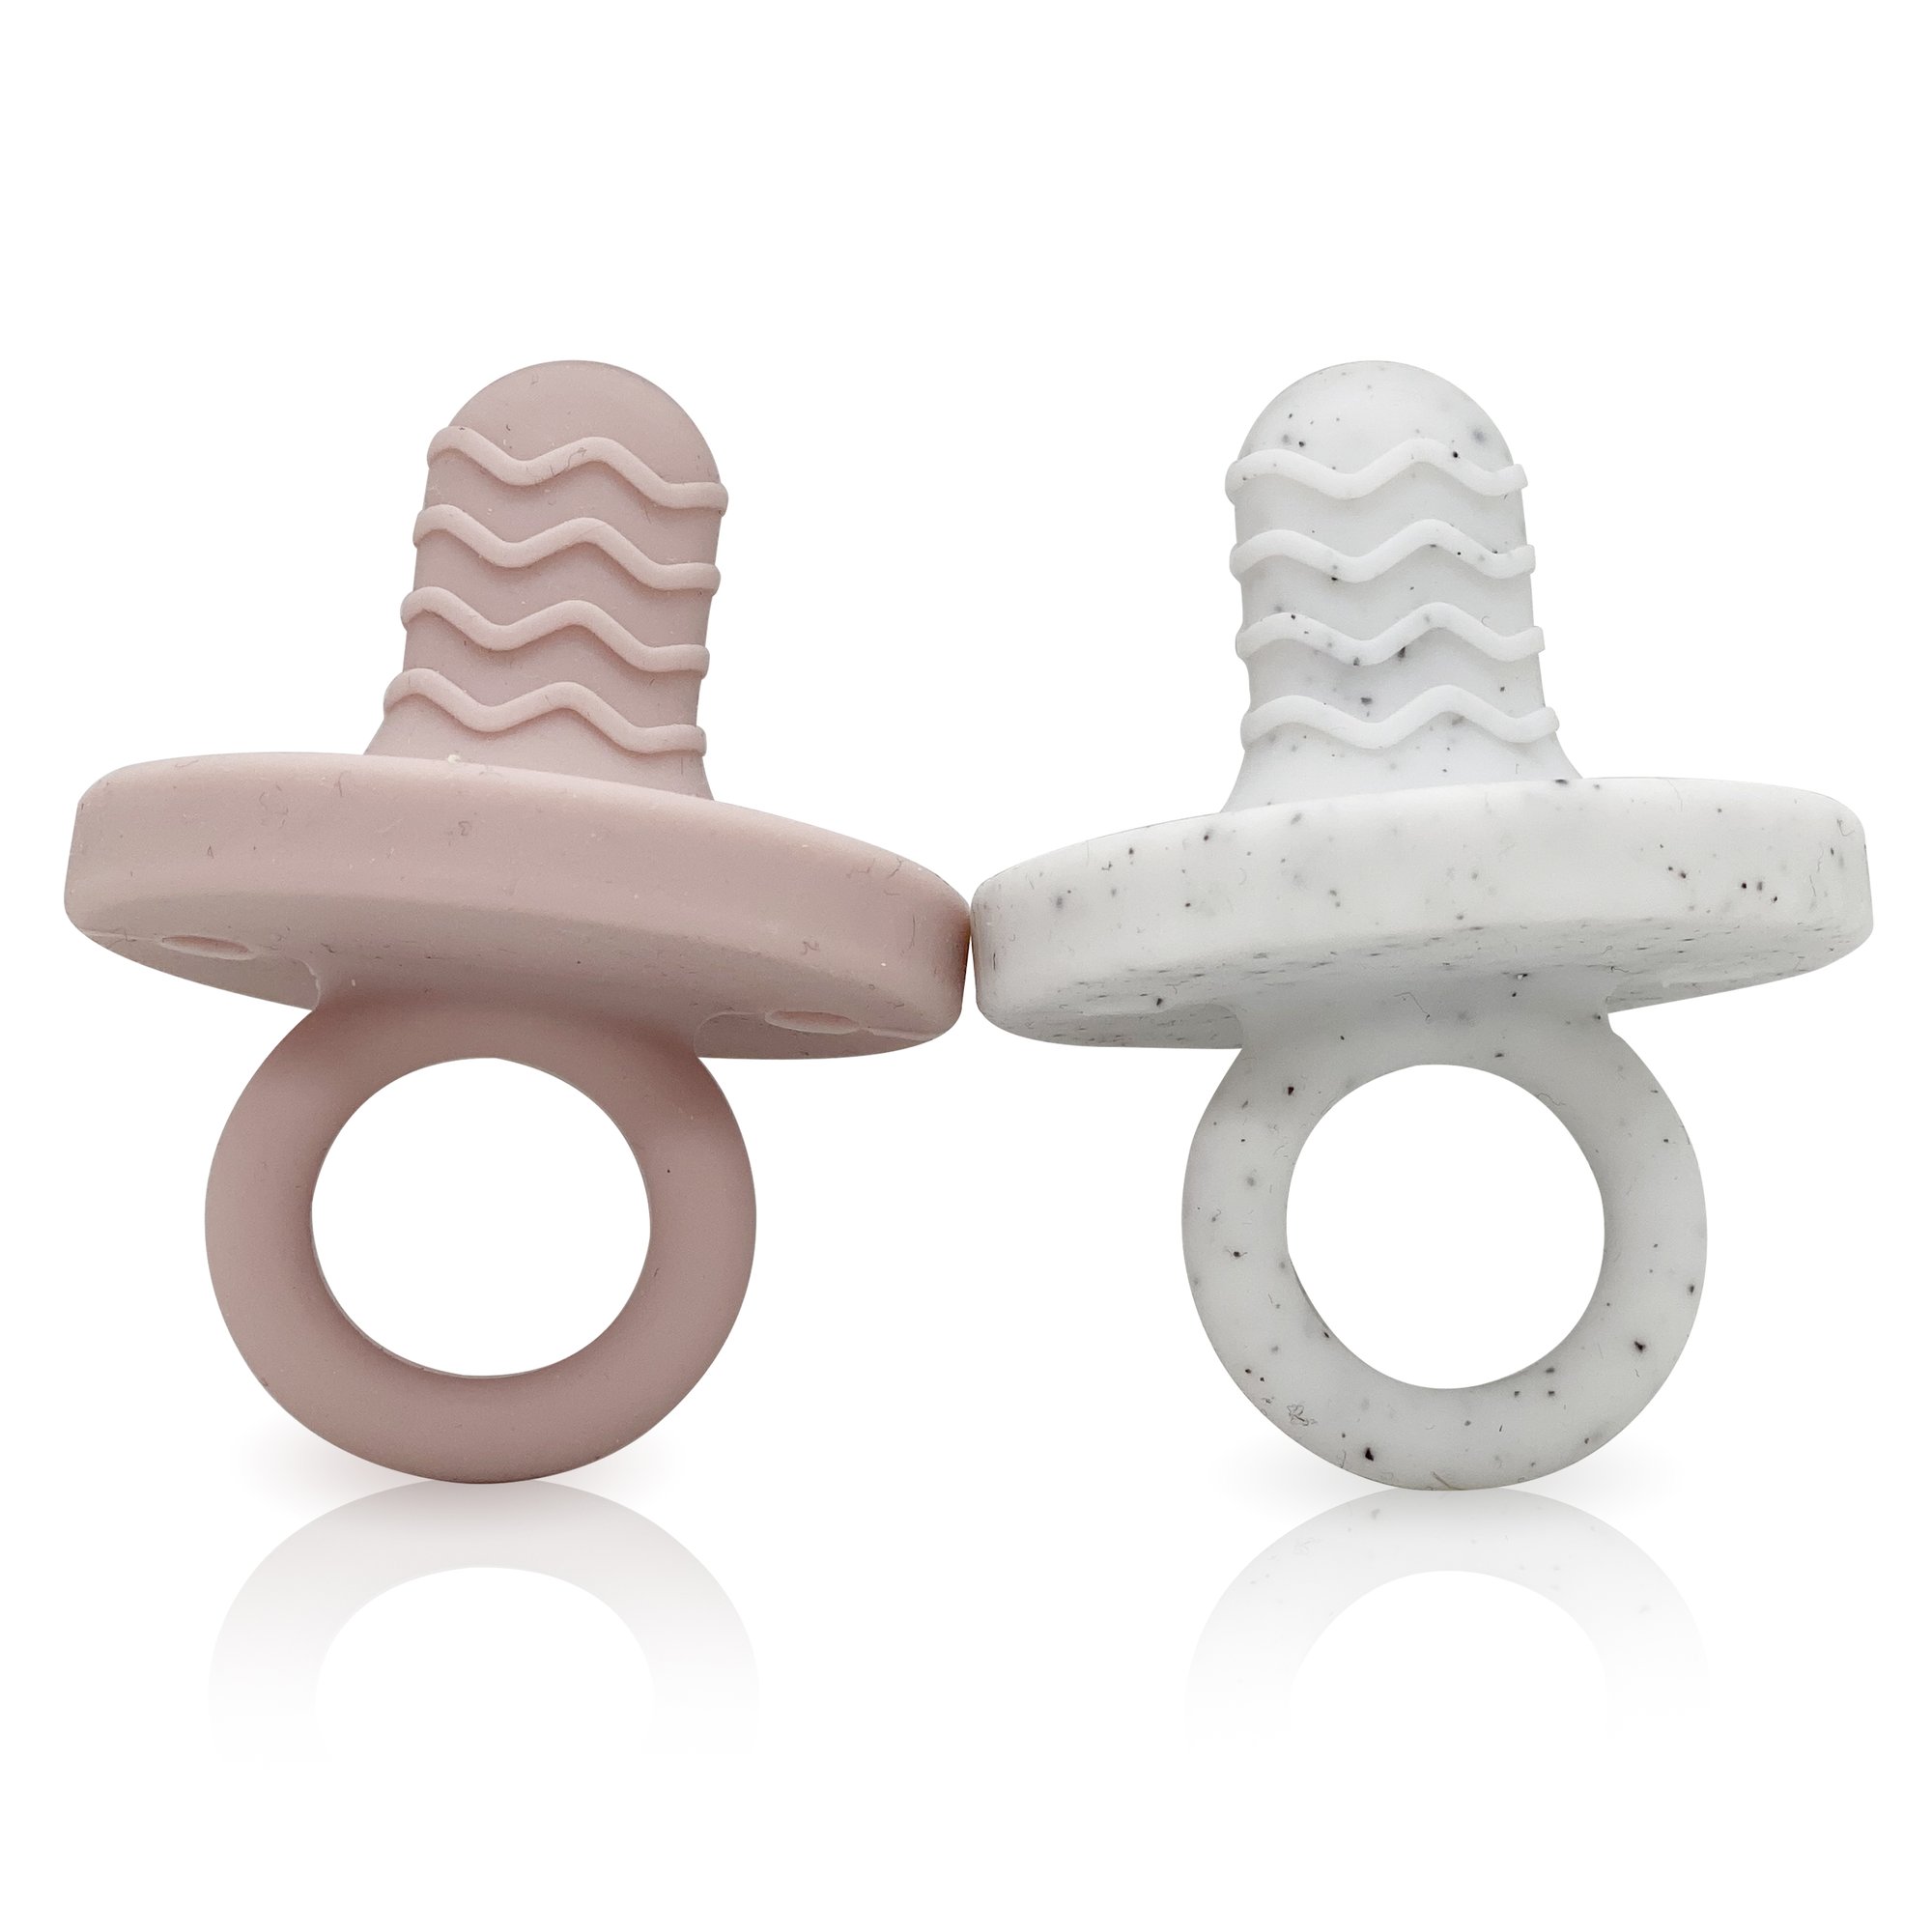 Siliteethe silicone teethers 2pk - rose and day dream grey